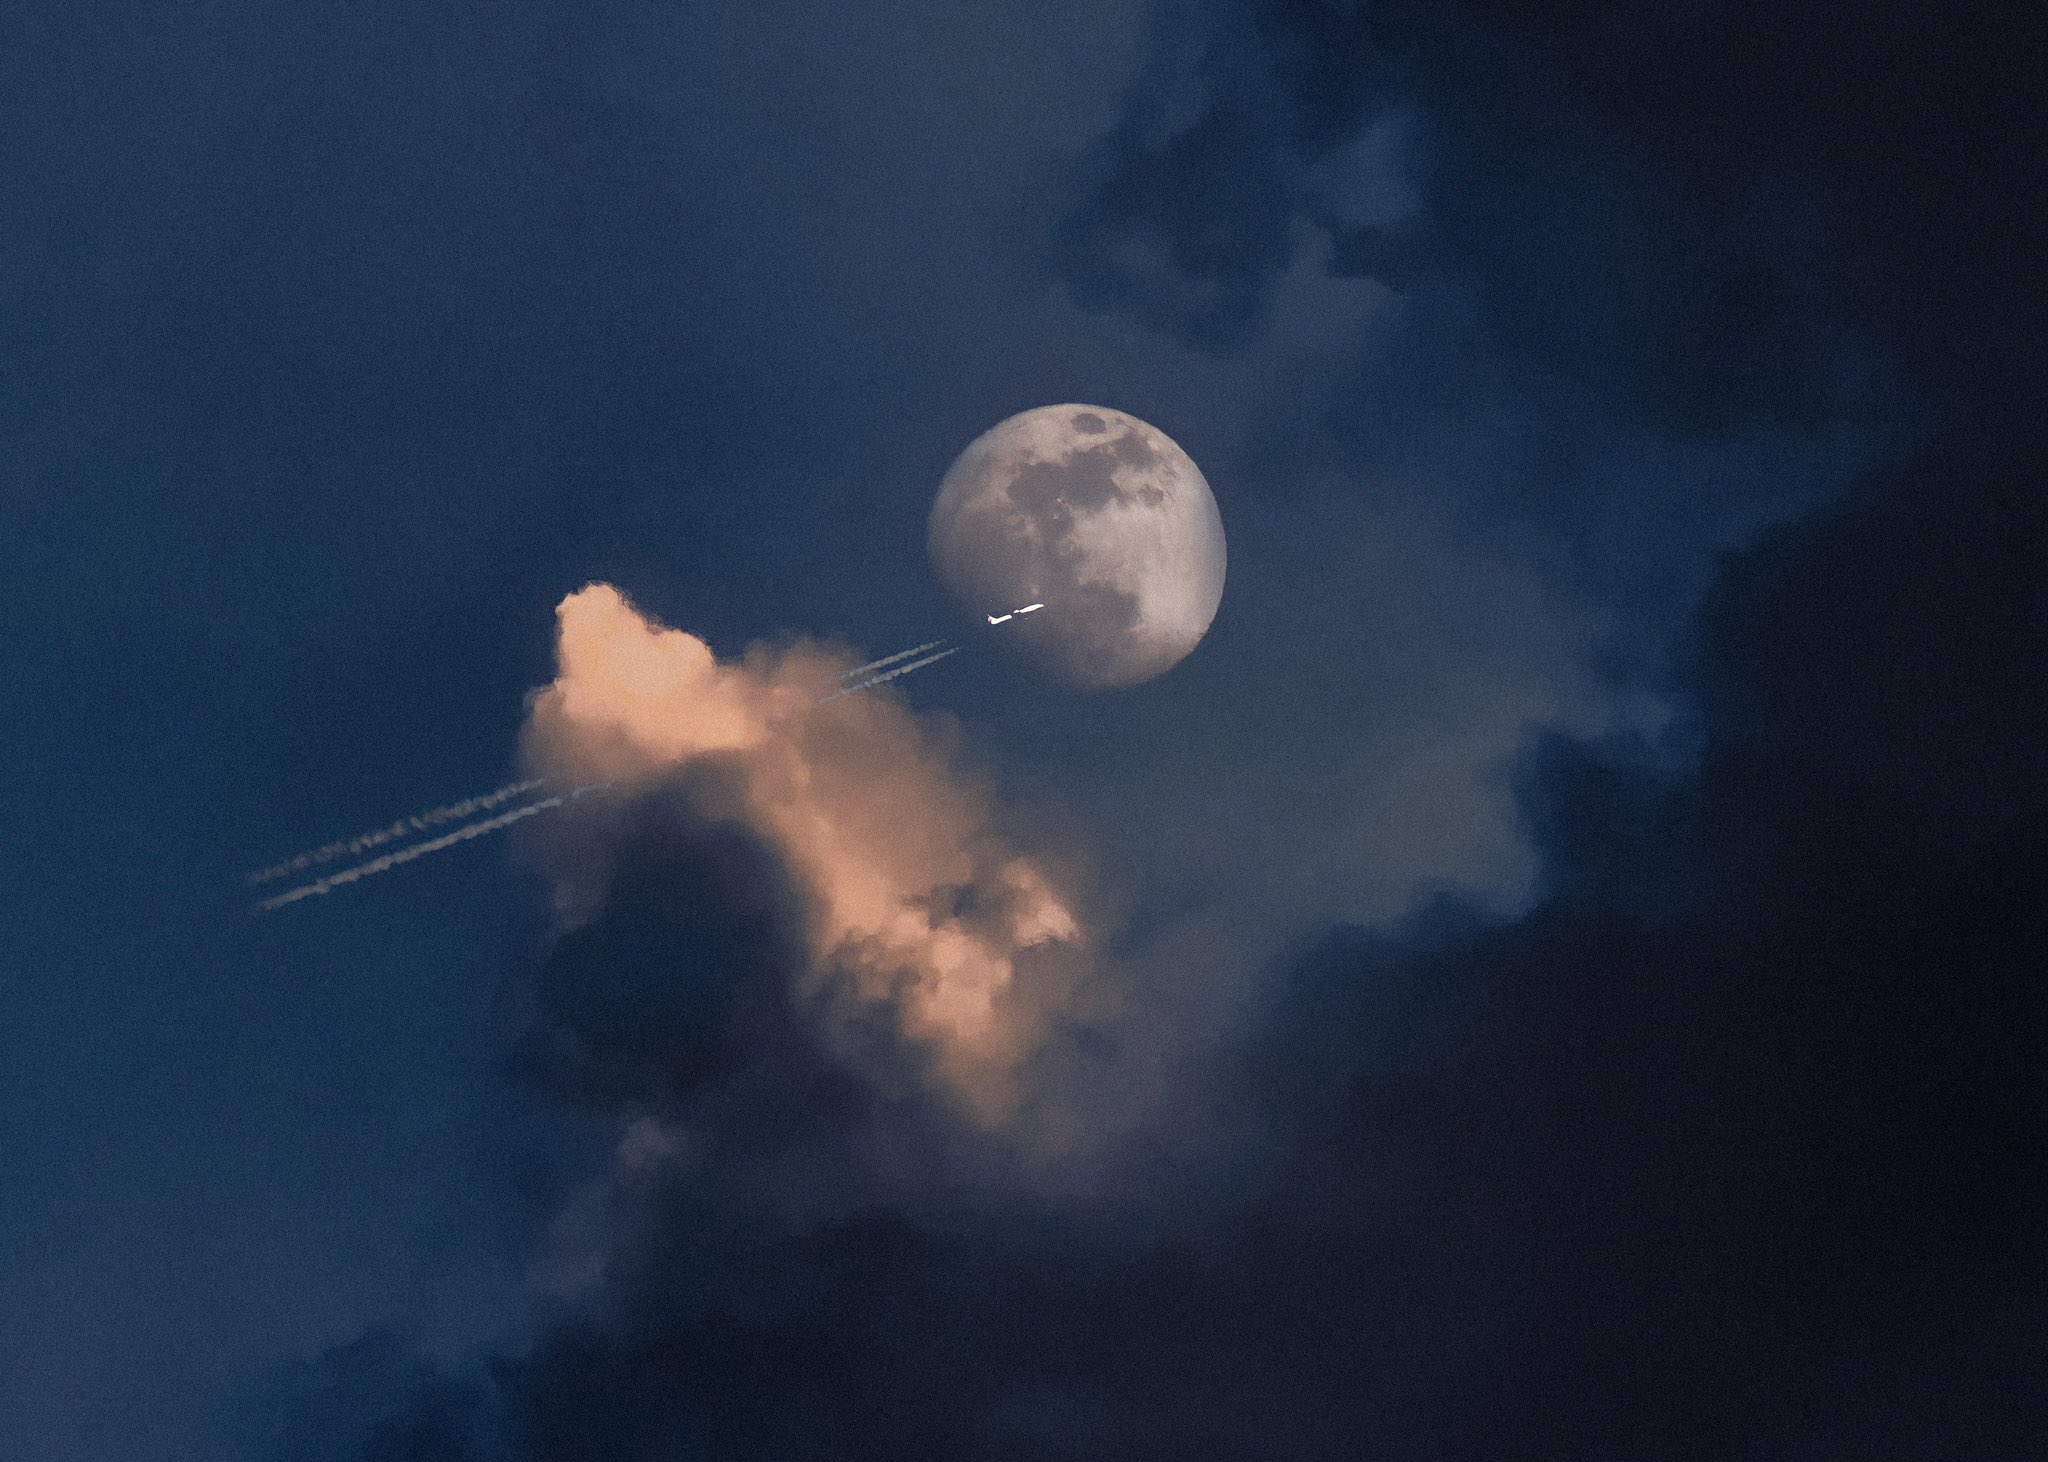 General 2048x1462 sky Moon nature clouds night airplane low light